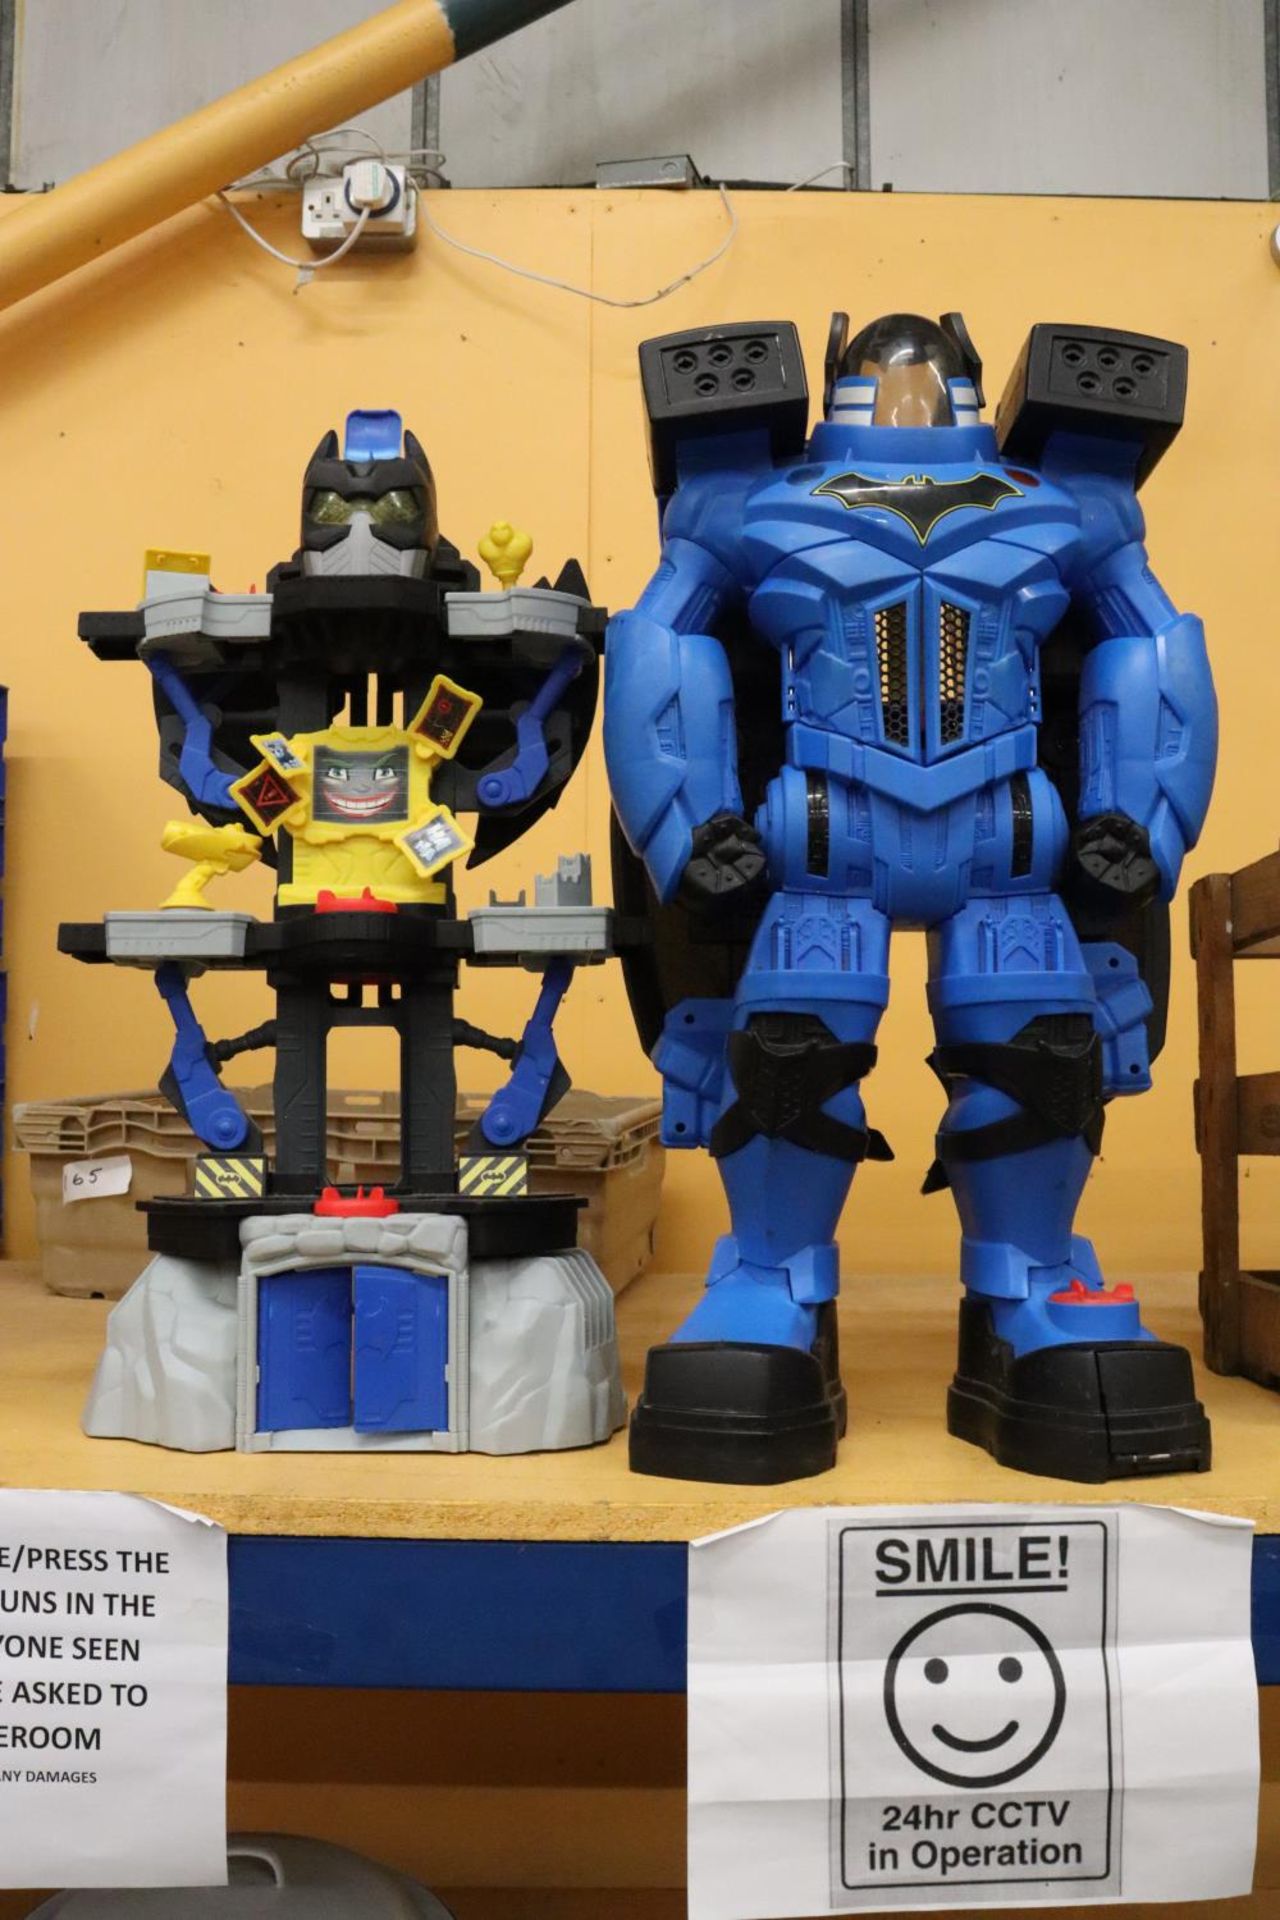 TWO LARGE BATMAN TRANSFORMER FIGURES, 28 INCHES HIGH - Image 2 of 6